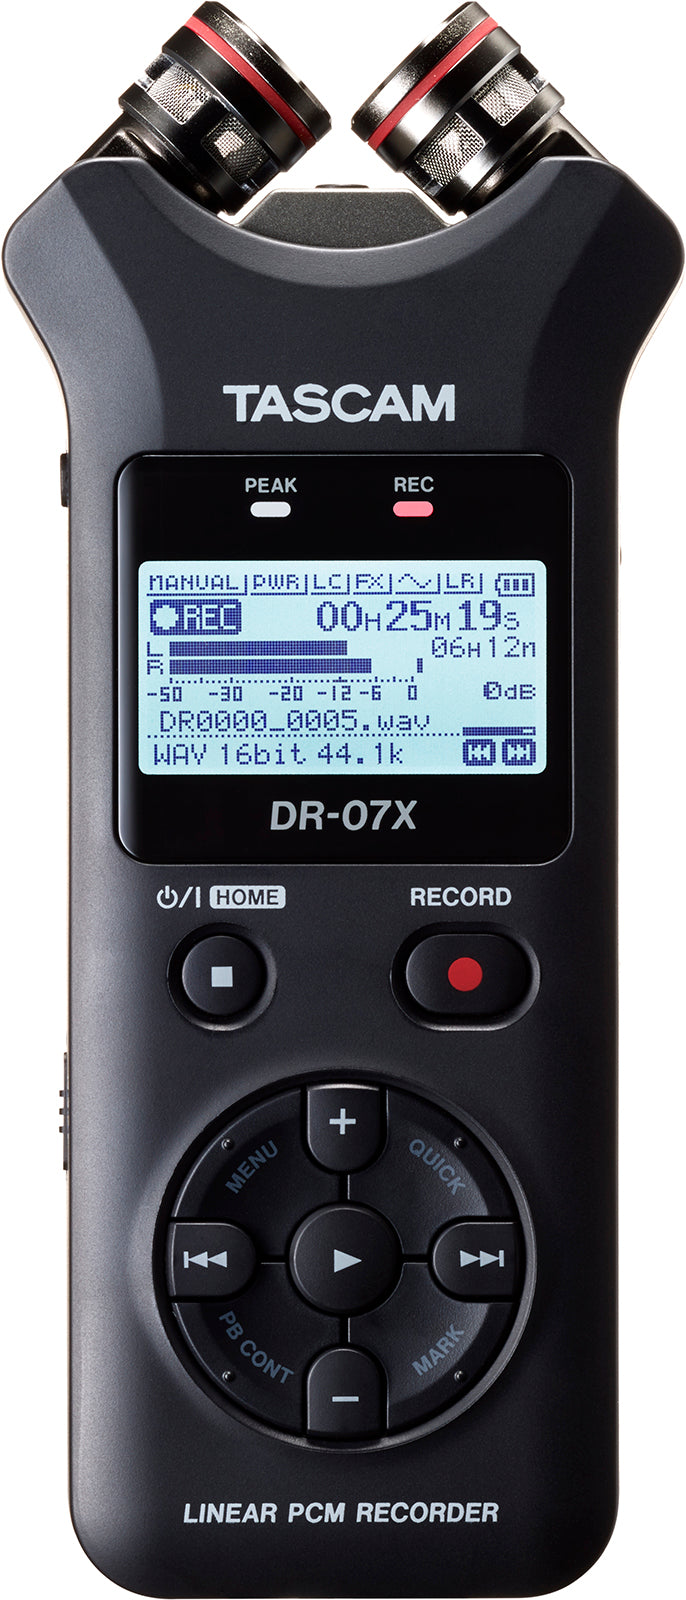 TASCAM DR-07X - Stereo Handheld Digital Audio Recorder and USB Audio Interface